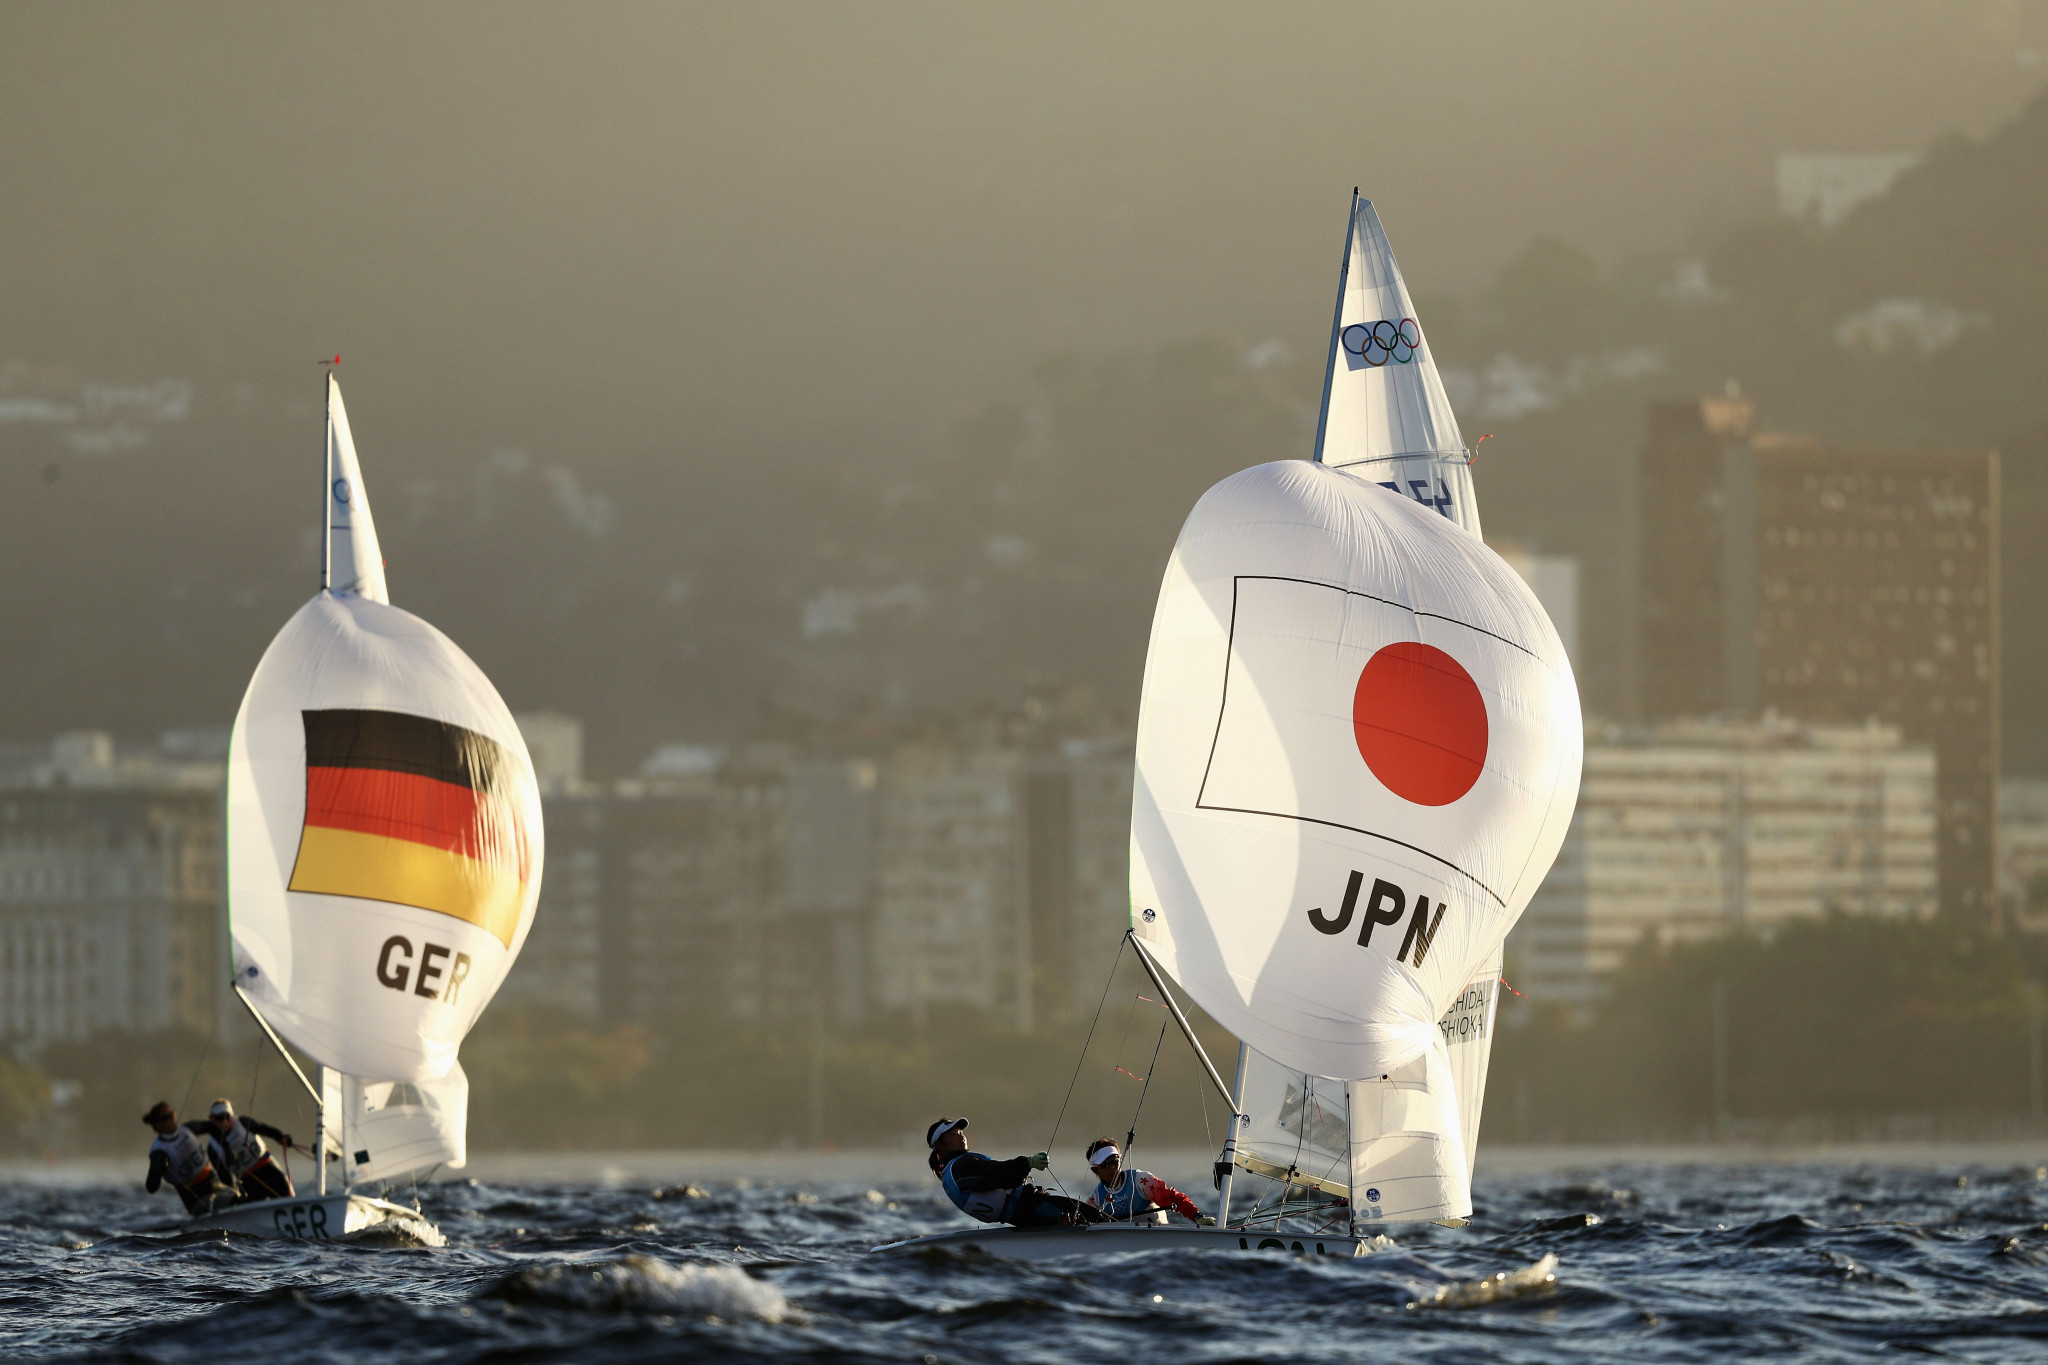 Germany's Luise Wanser and Philipp Autenrieth won the 470 World Championship a day early in Israel ©Getty Images